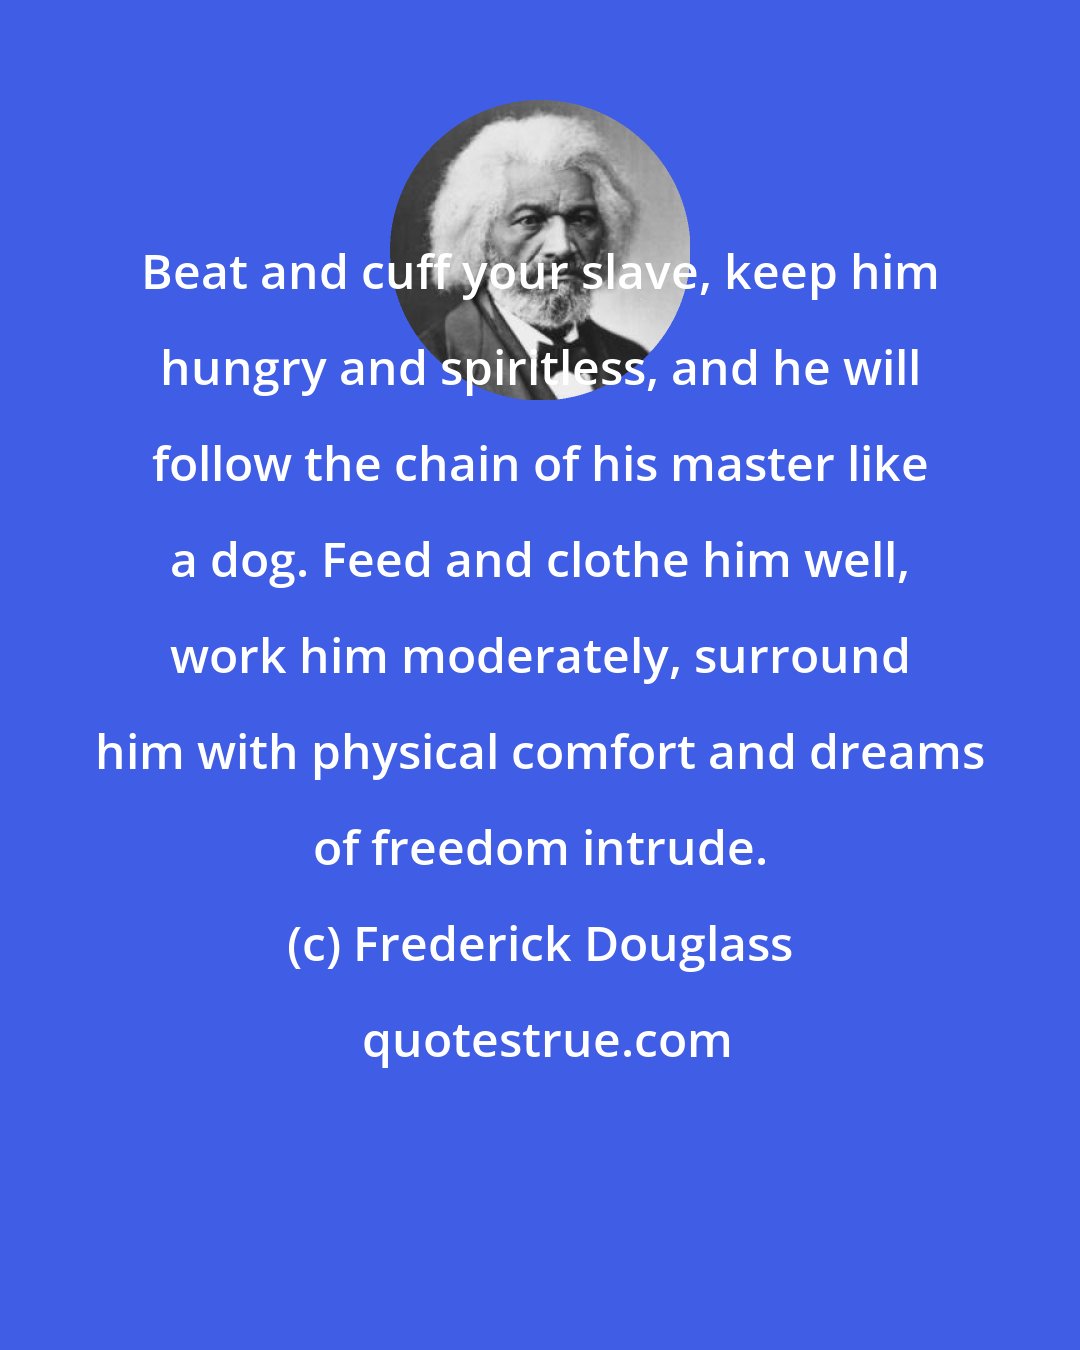 Frederick Douglass: Beat and cuff your slave, keep him hungry and spiritless, and he will follow the chain of his master like a dog. Feed and clothe him well, work him moderately, surround him with physical comfort and dreams of freedom intrude.